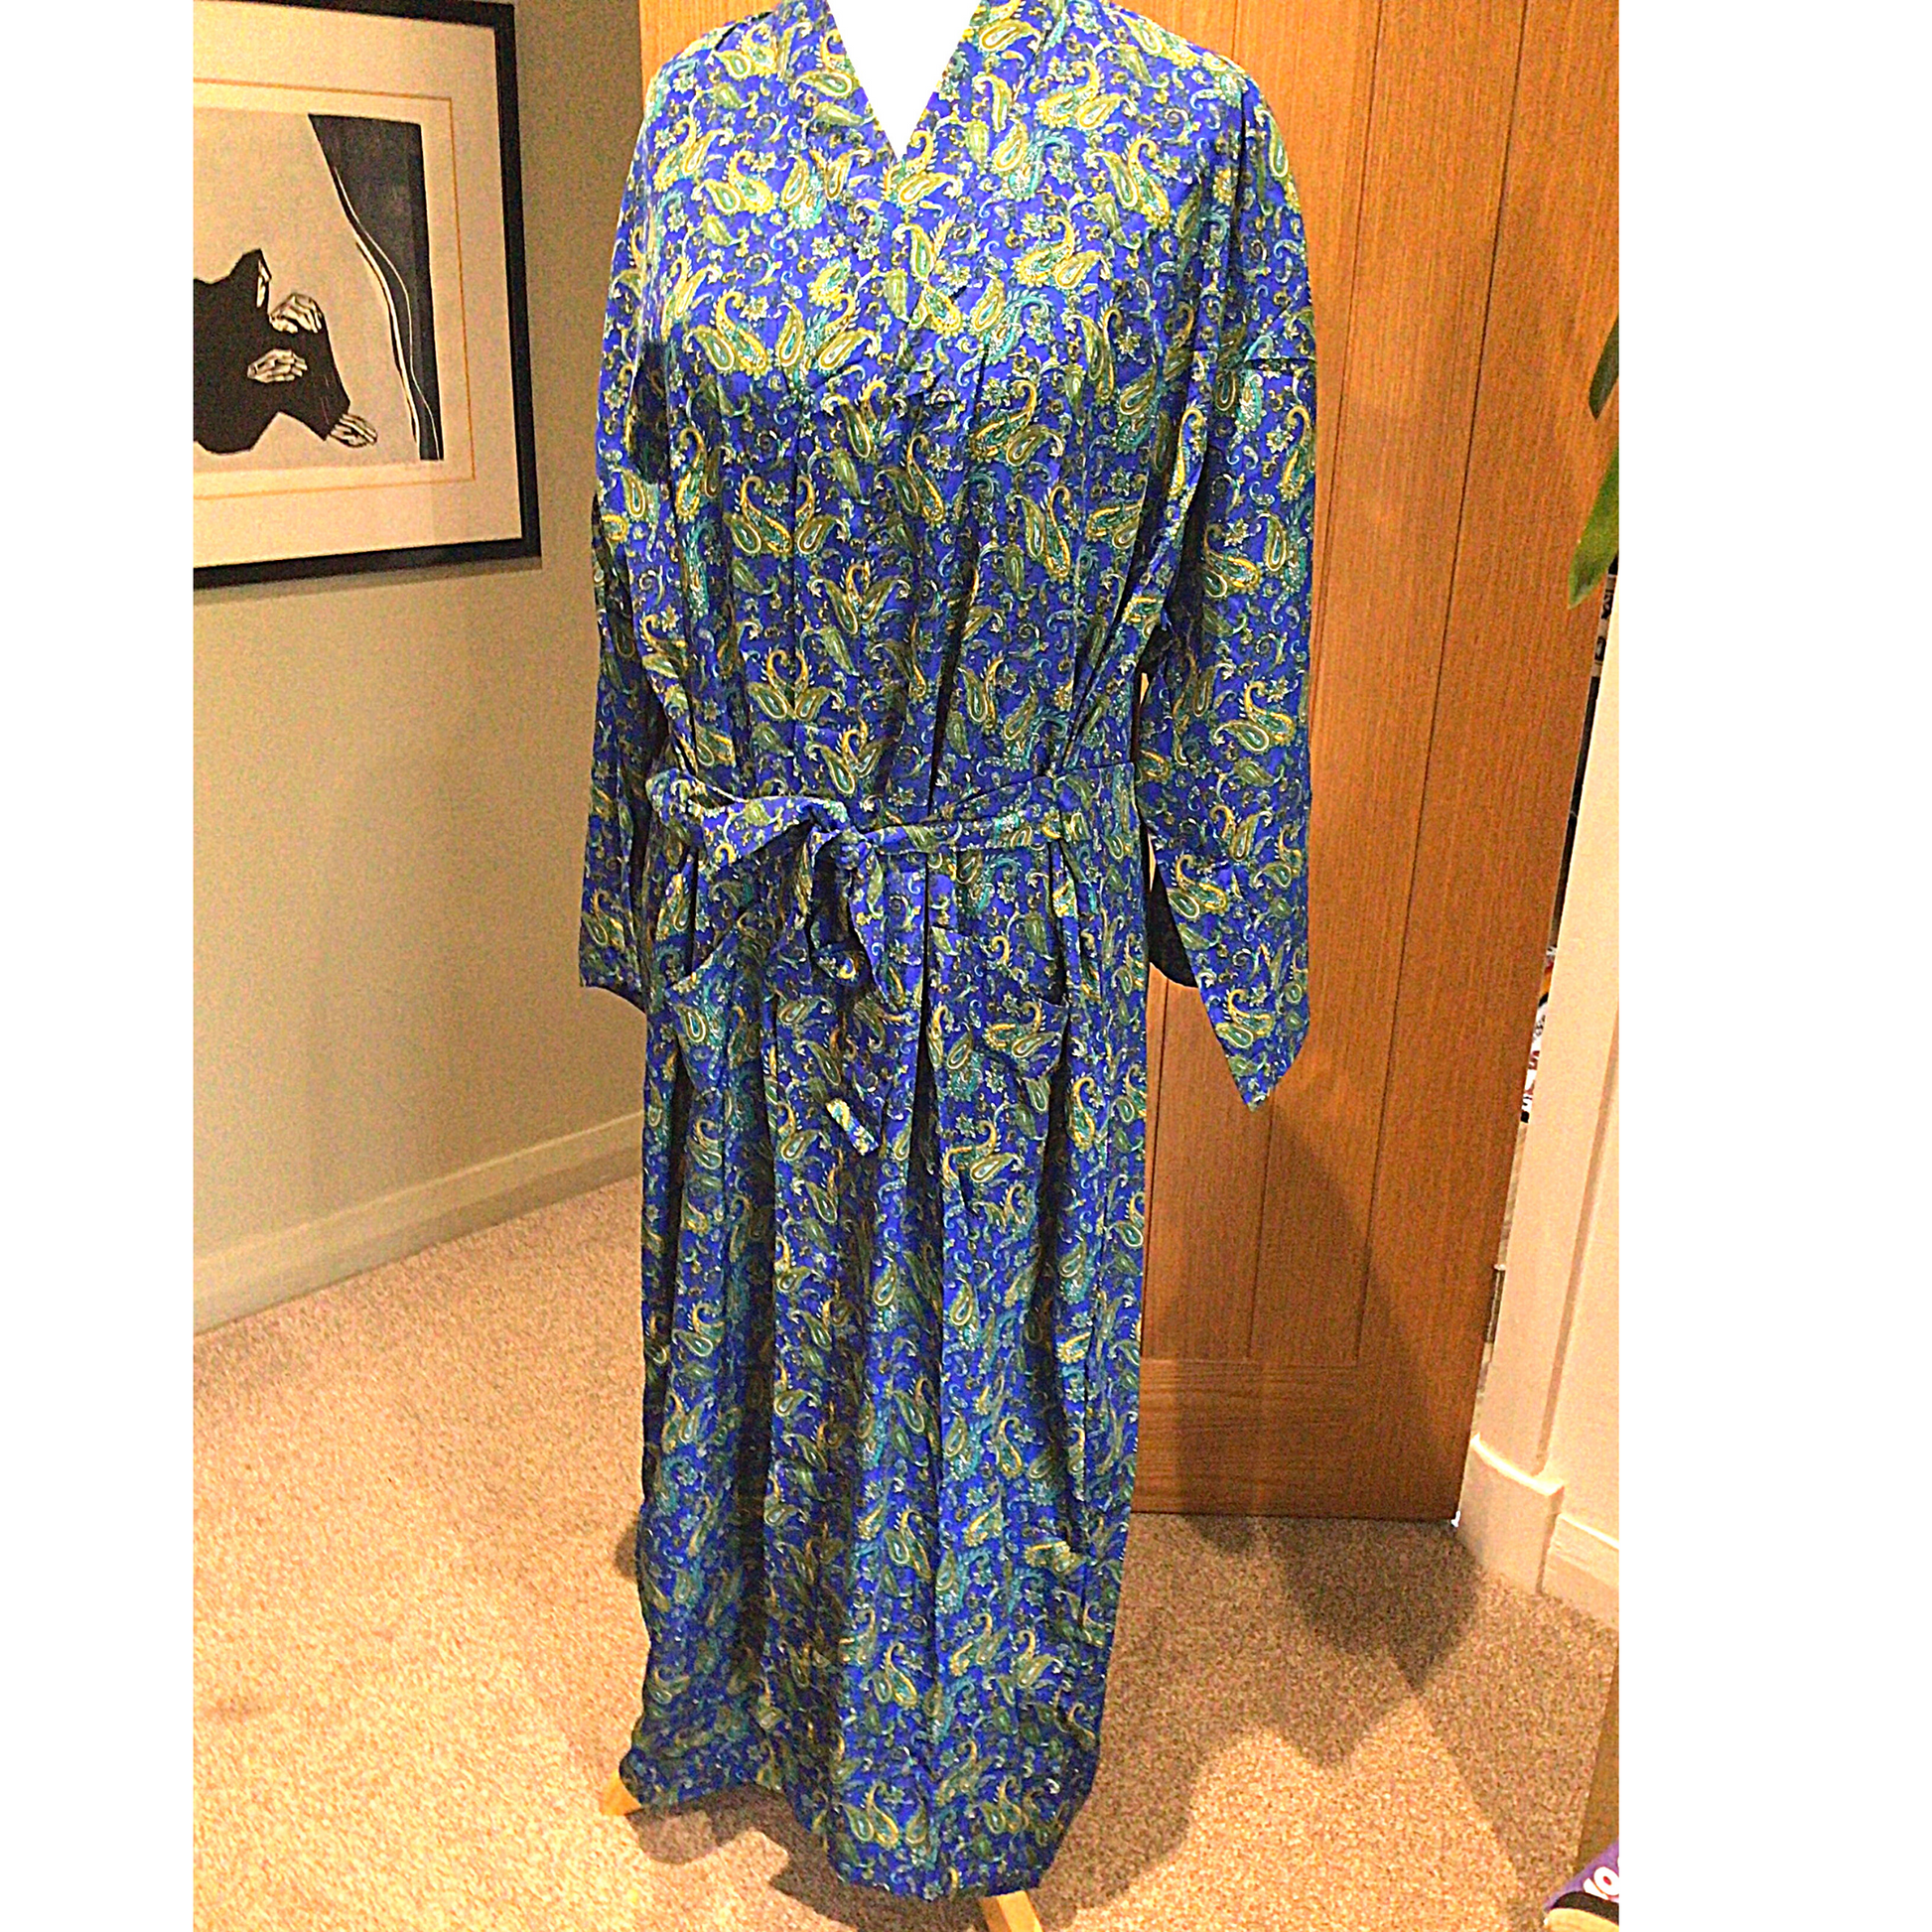 Royal blue background paisley design dressing gown, Kimono style dressing gown. Calf length dressing gown, pockets in dressing gown, Medium size blue dressing gown, Size 12 blue paisley dressing gown, Large size paisley dressing gown, Size 14 pink kimono style dressing gown, Size 16 dressing gown, Paisley design dressing gown, blue patterned dressing gown